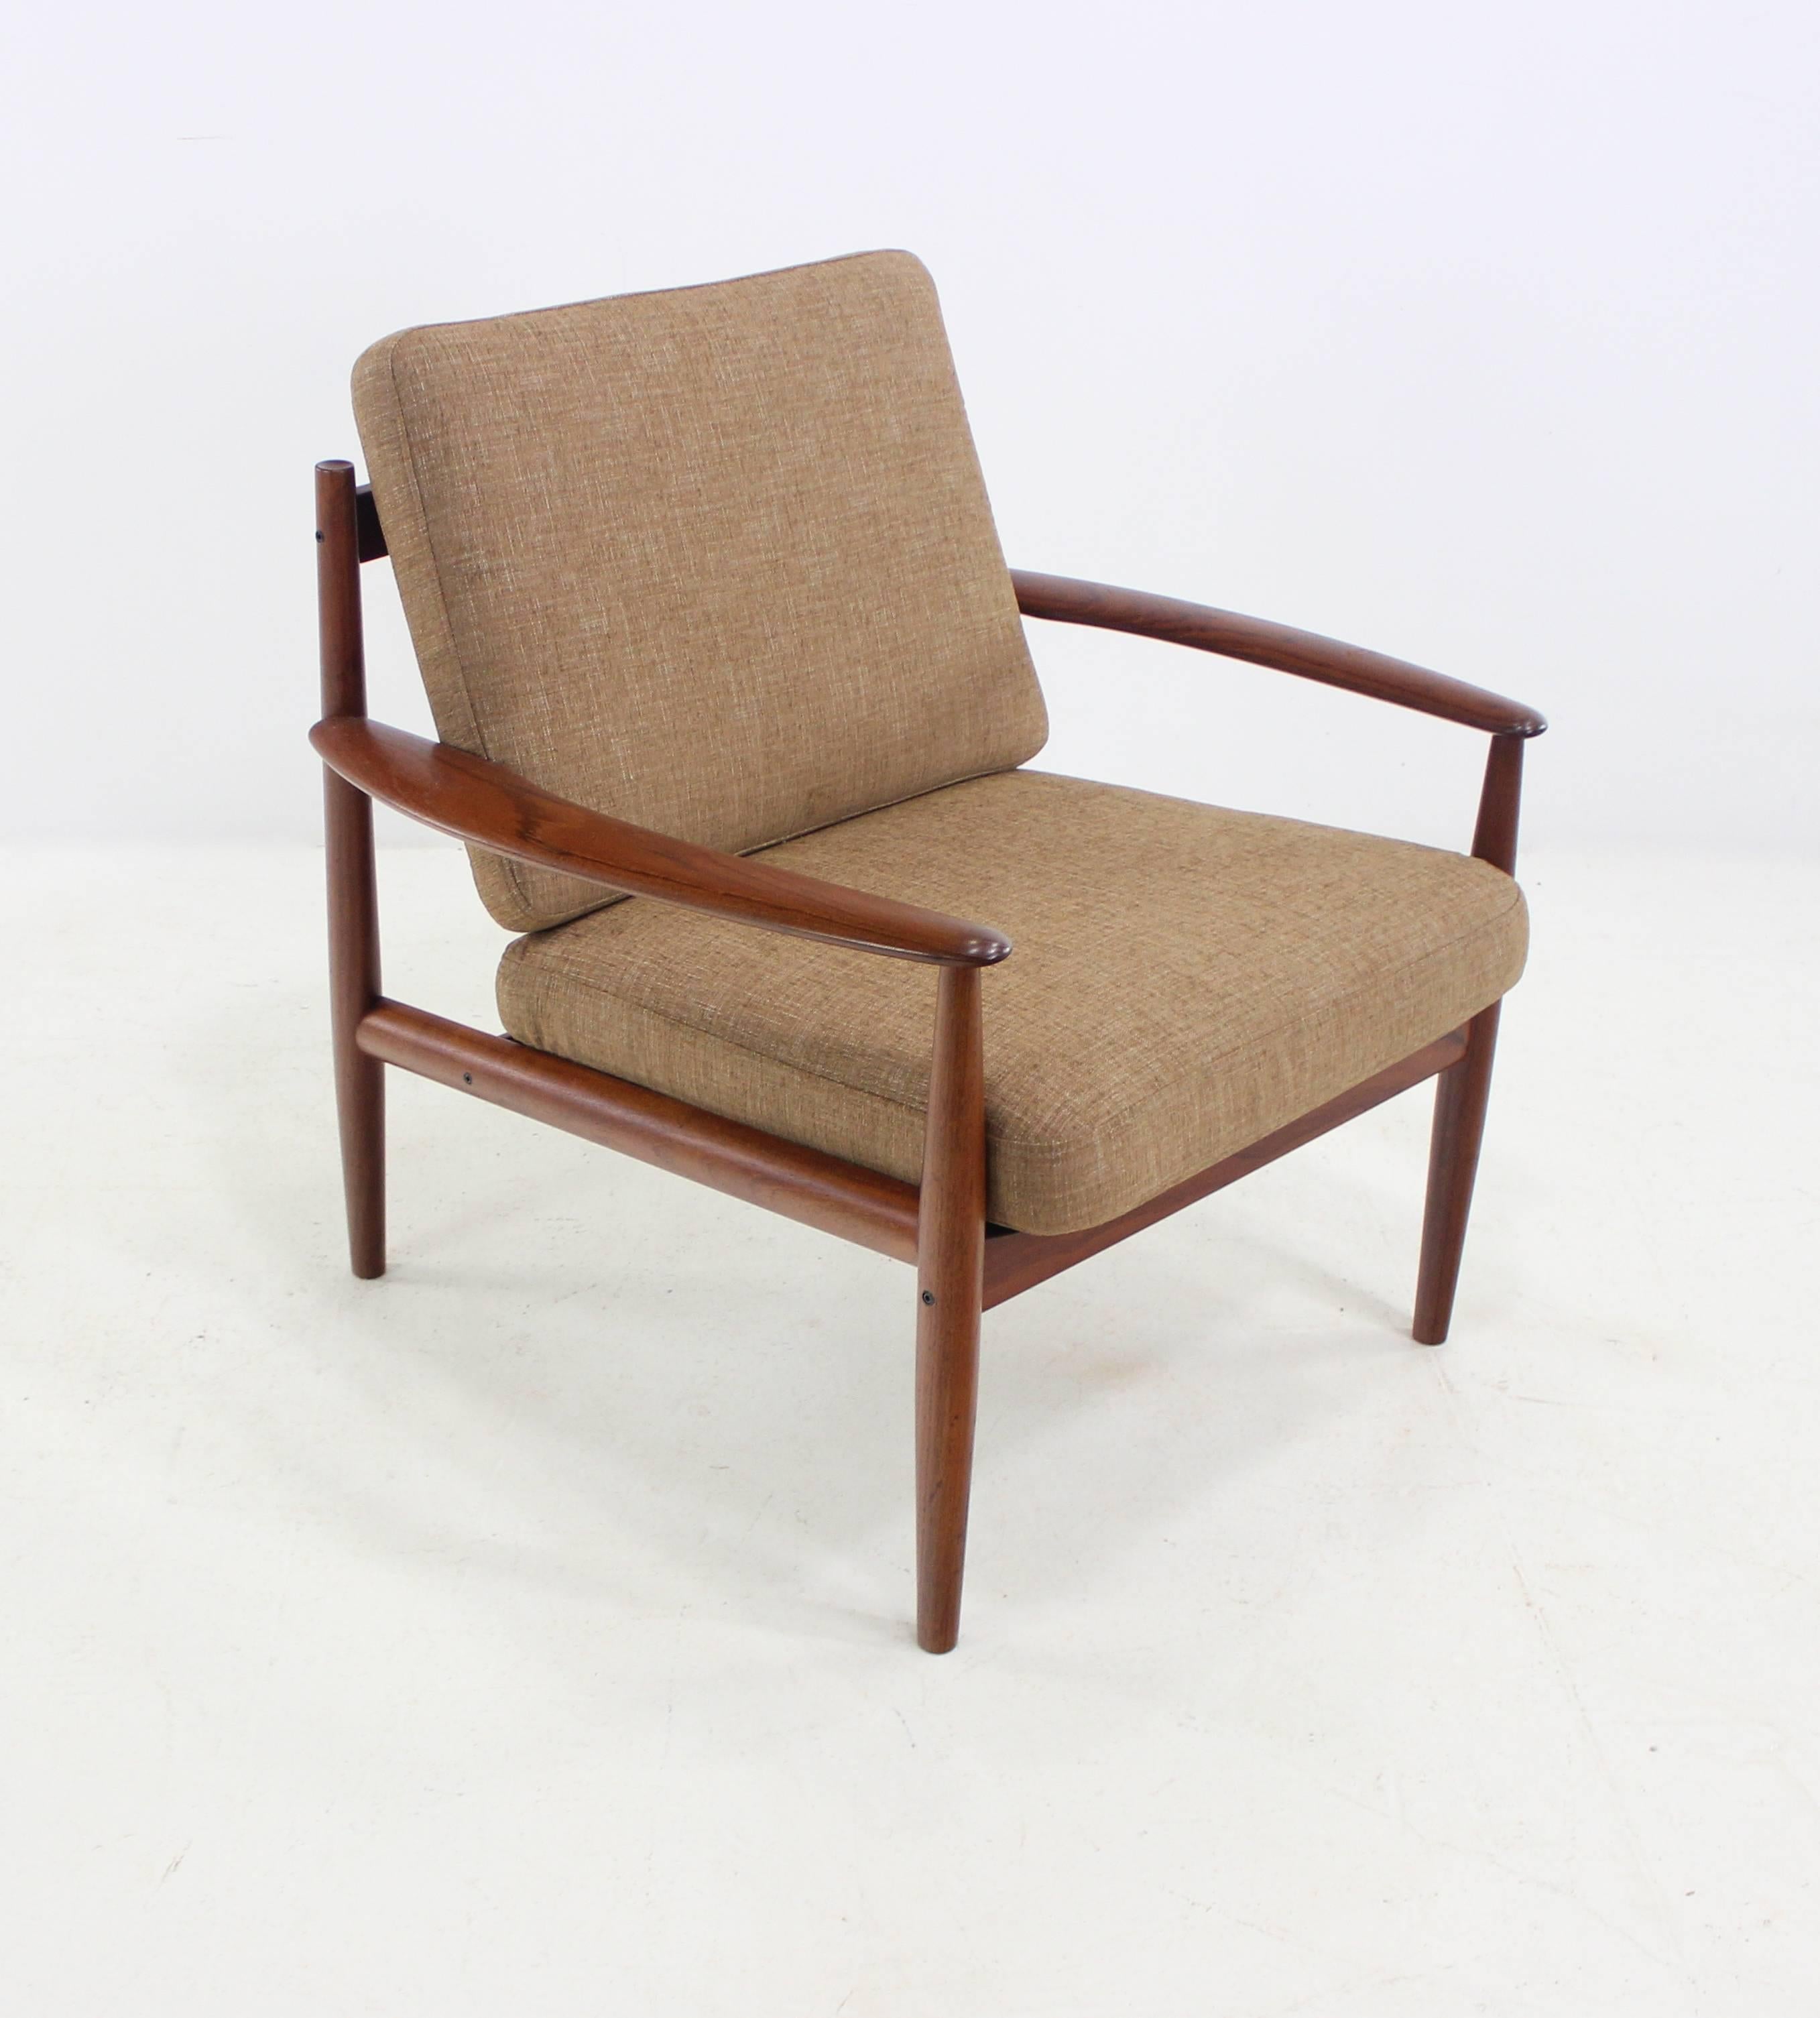 Pair of Danish Modern Teak Armchairs Designed by Grete Jalk In Excellent Condition For Sale In Portland, OR